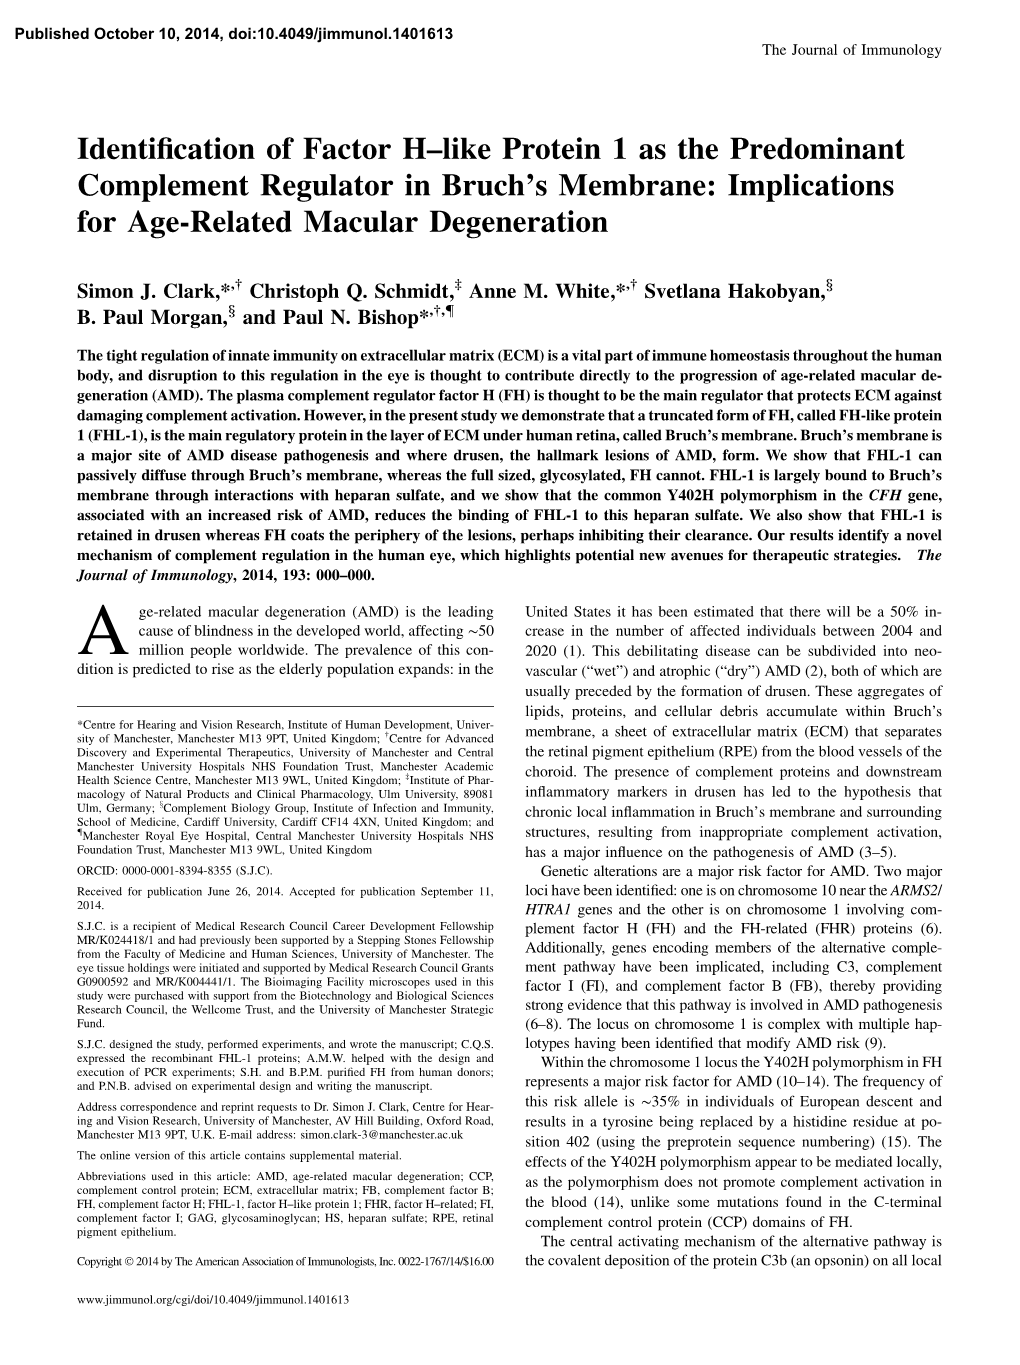 Age-Related Macular Degeneration Bruch's Membrane